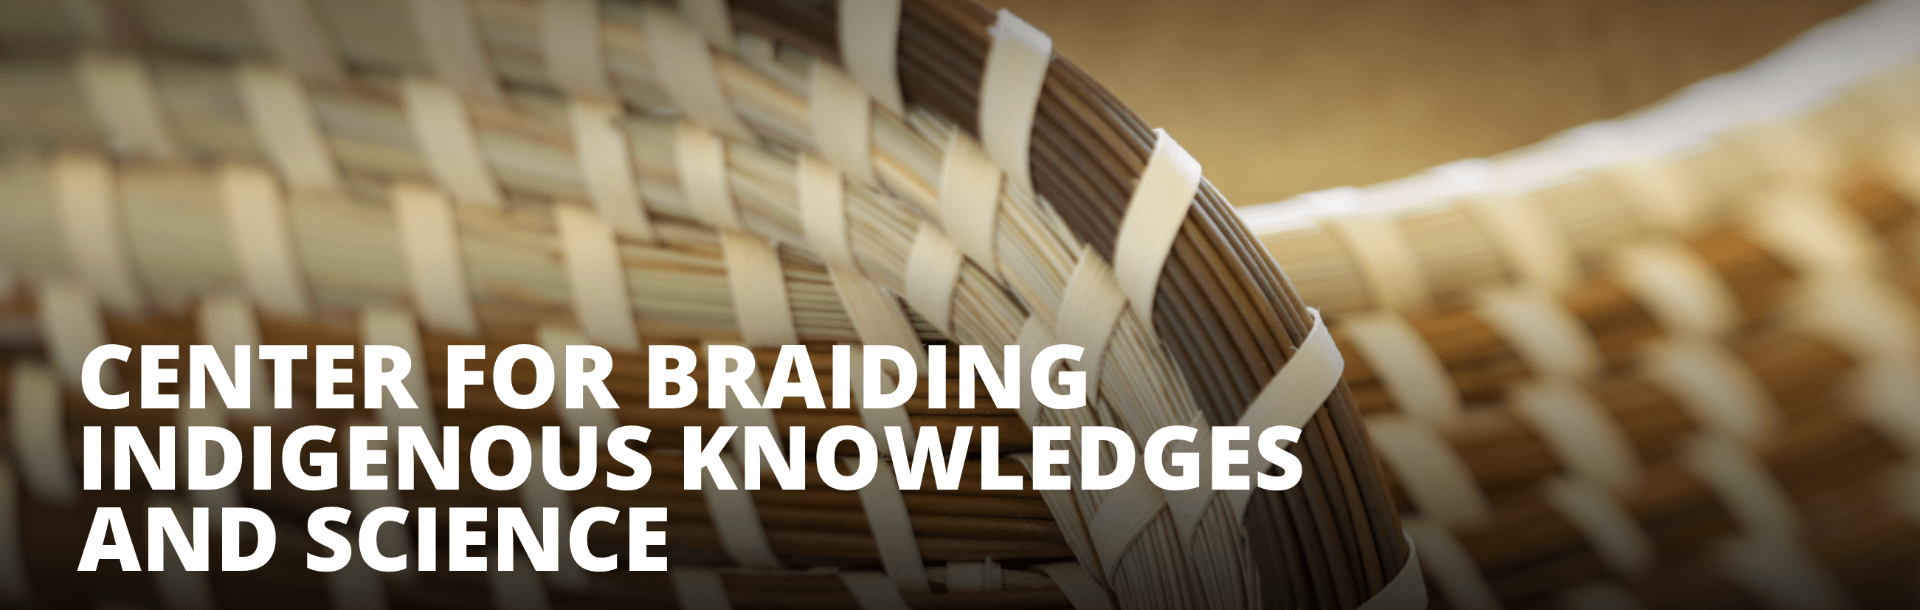 Anthropology faculty members partner on new National Science Foundation Center for Braiding Indigenous Knowledges and Science